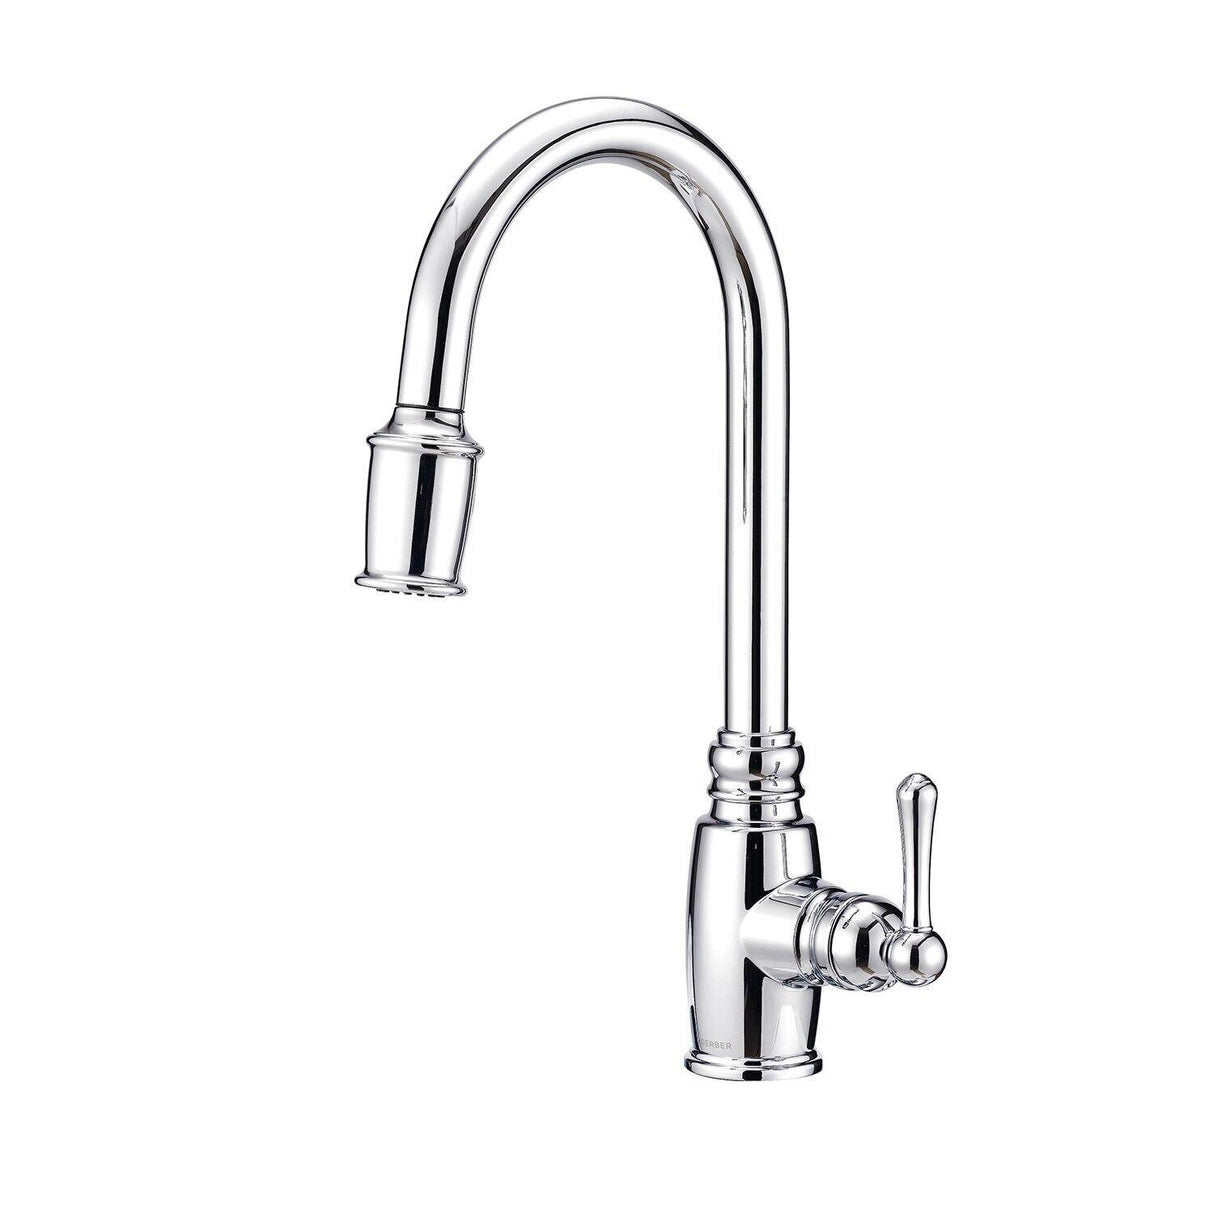 Gerber D454057SS Stainless Steel Opulence Single Handle Pull-down Kitchen Faucet